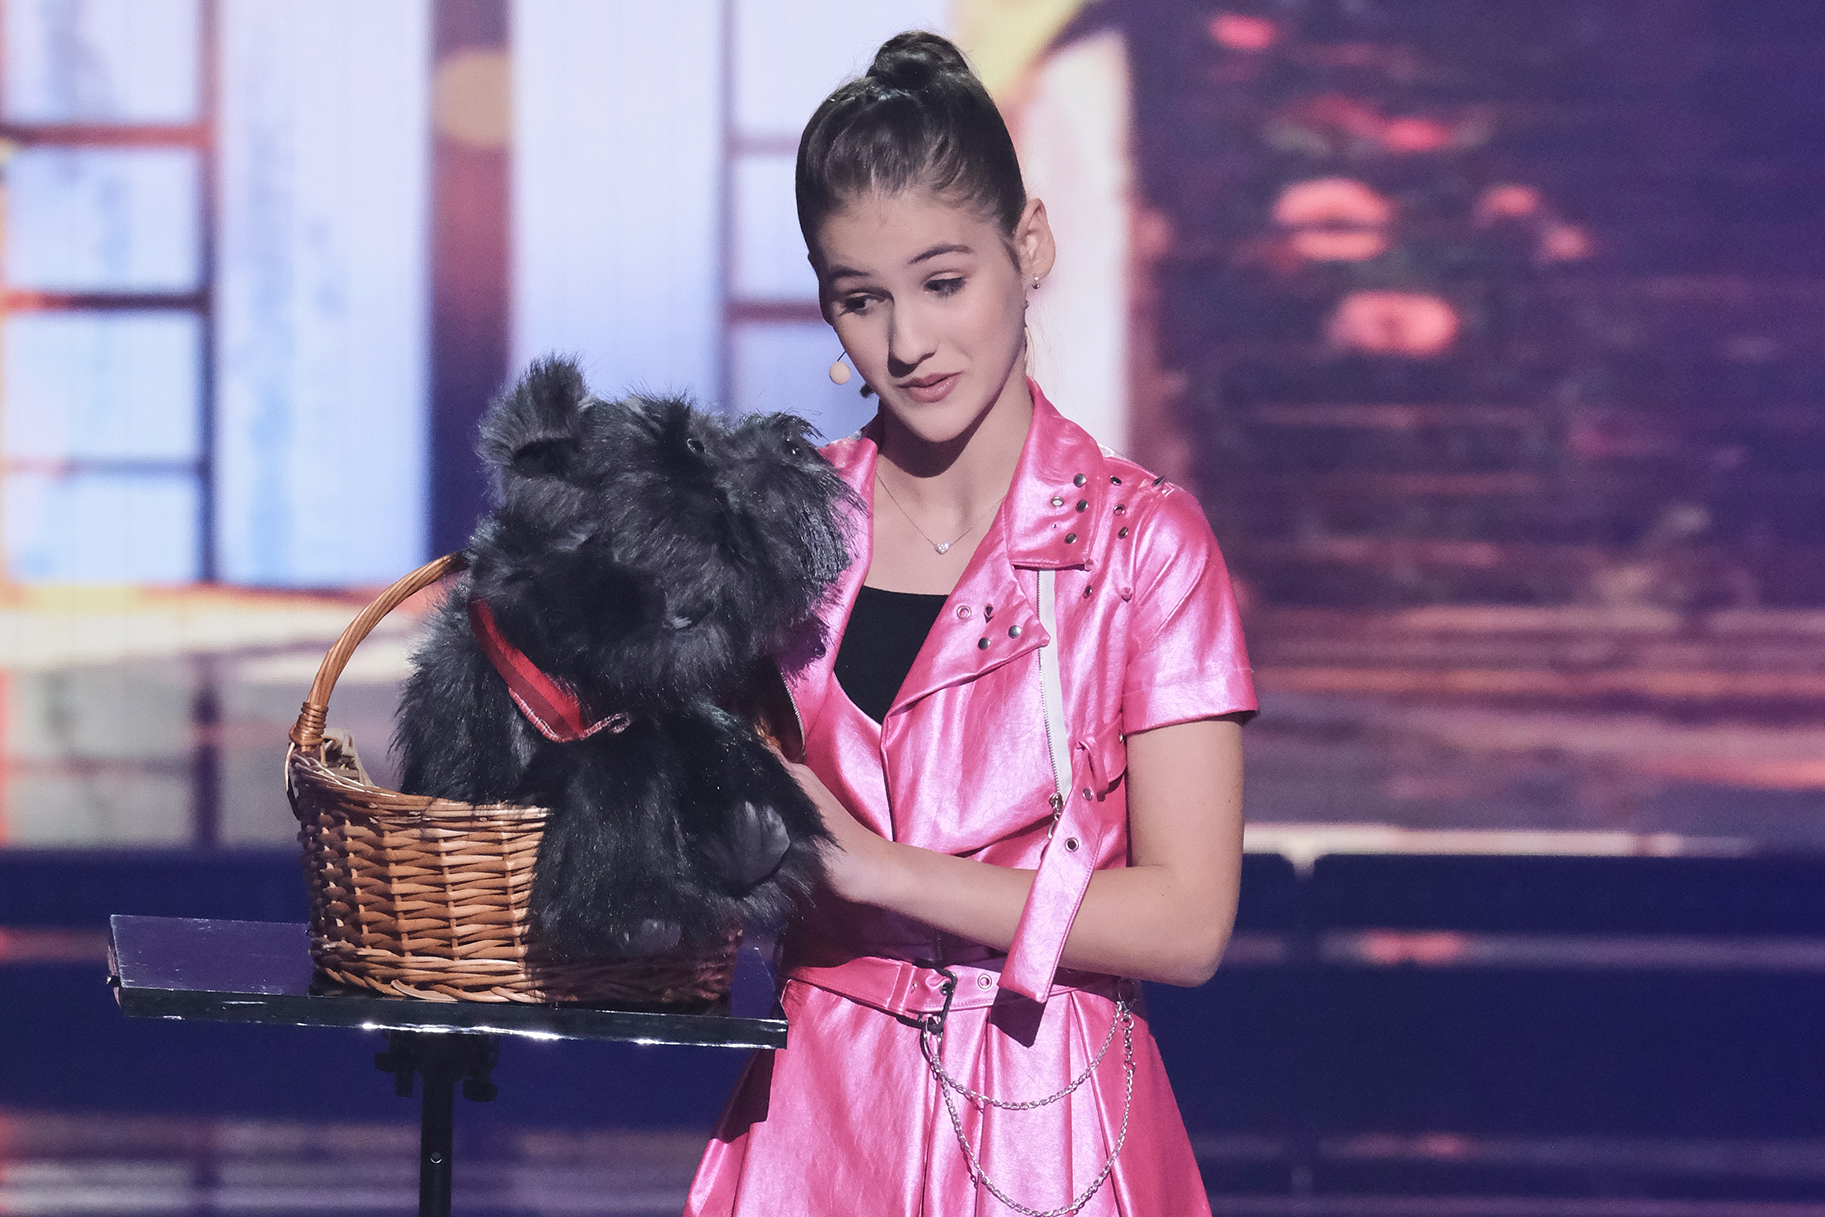 See Why This Year Old Singing Ventriloquist Shocked The AGT All